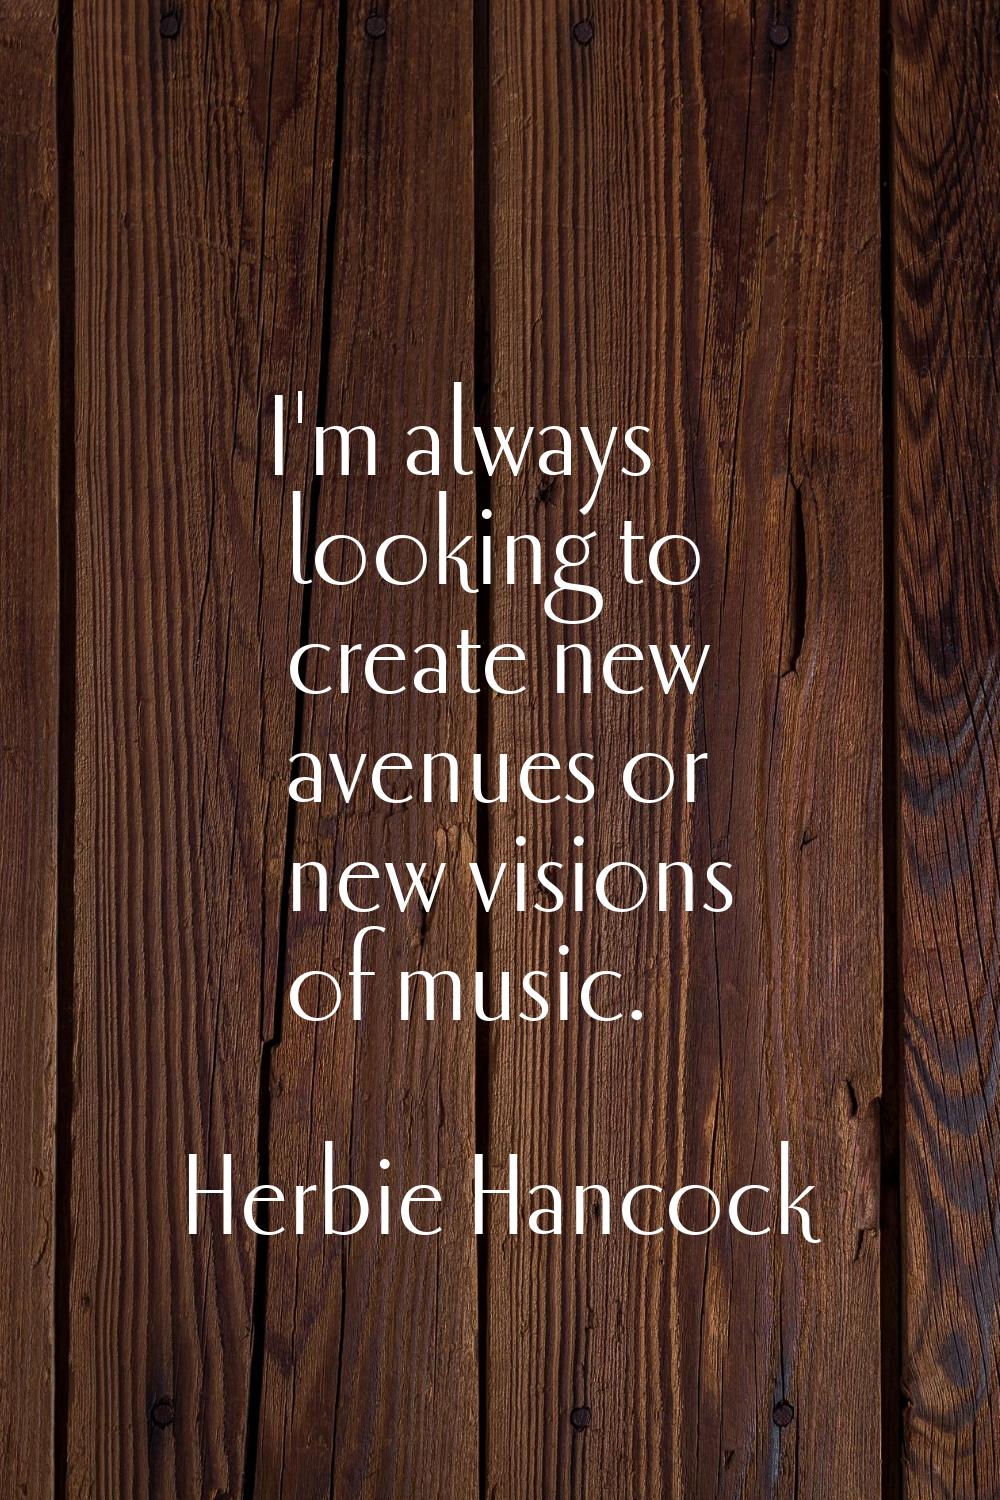 I'm always looking to create new avenues or new visions of music.